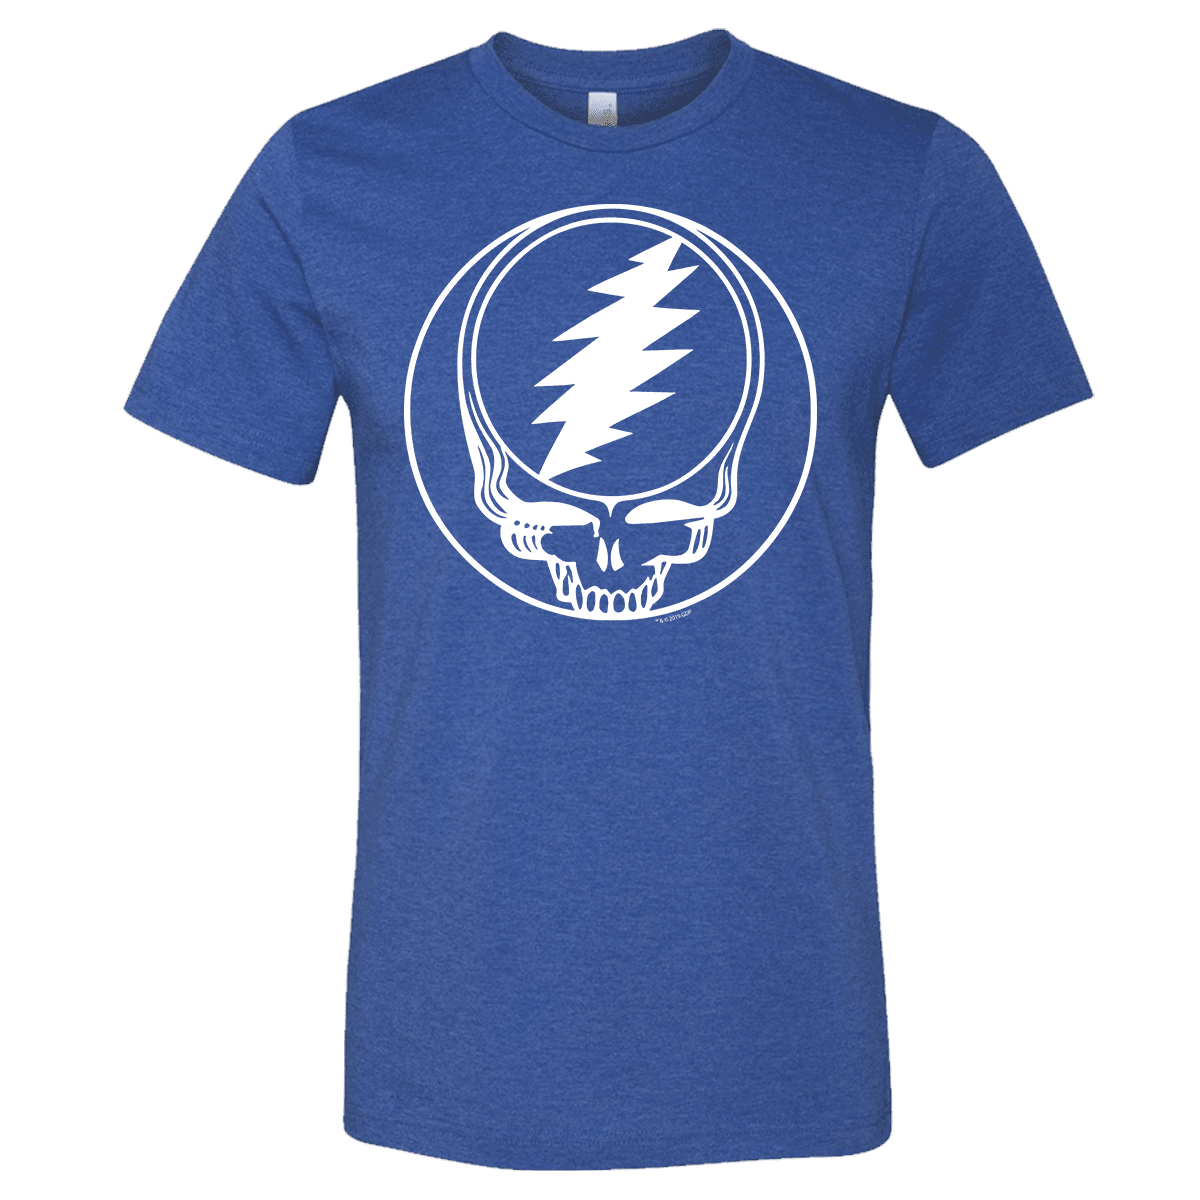 Grateful Dead Steal Your Face Logo t-shirt with a Shamrock – The